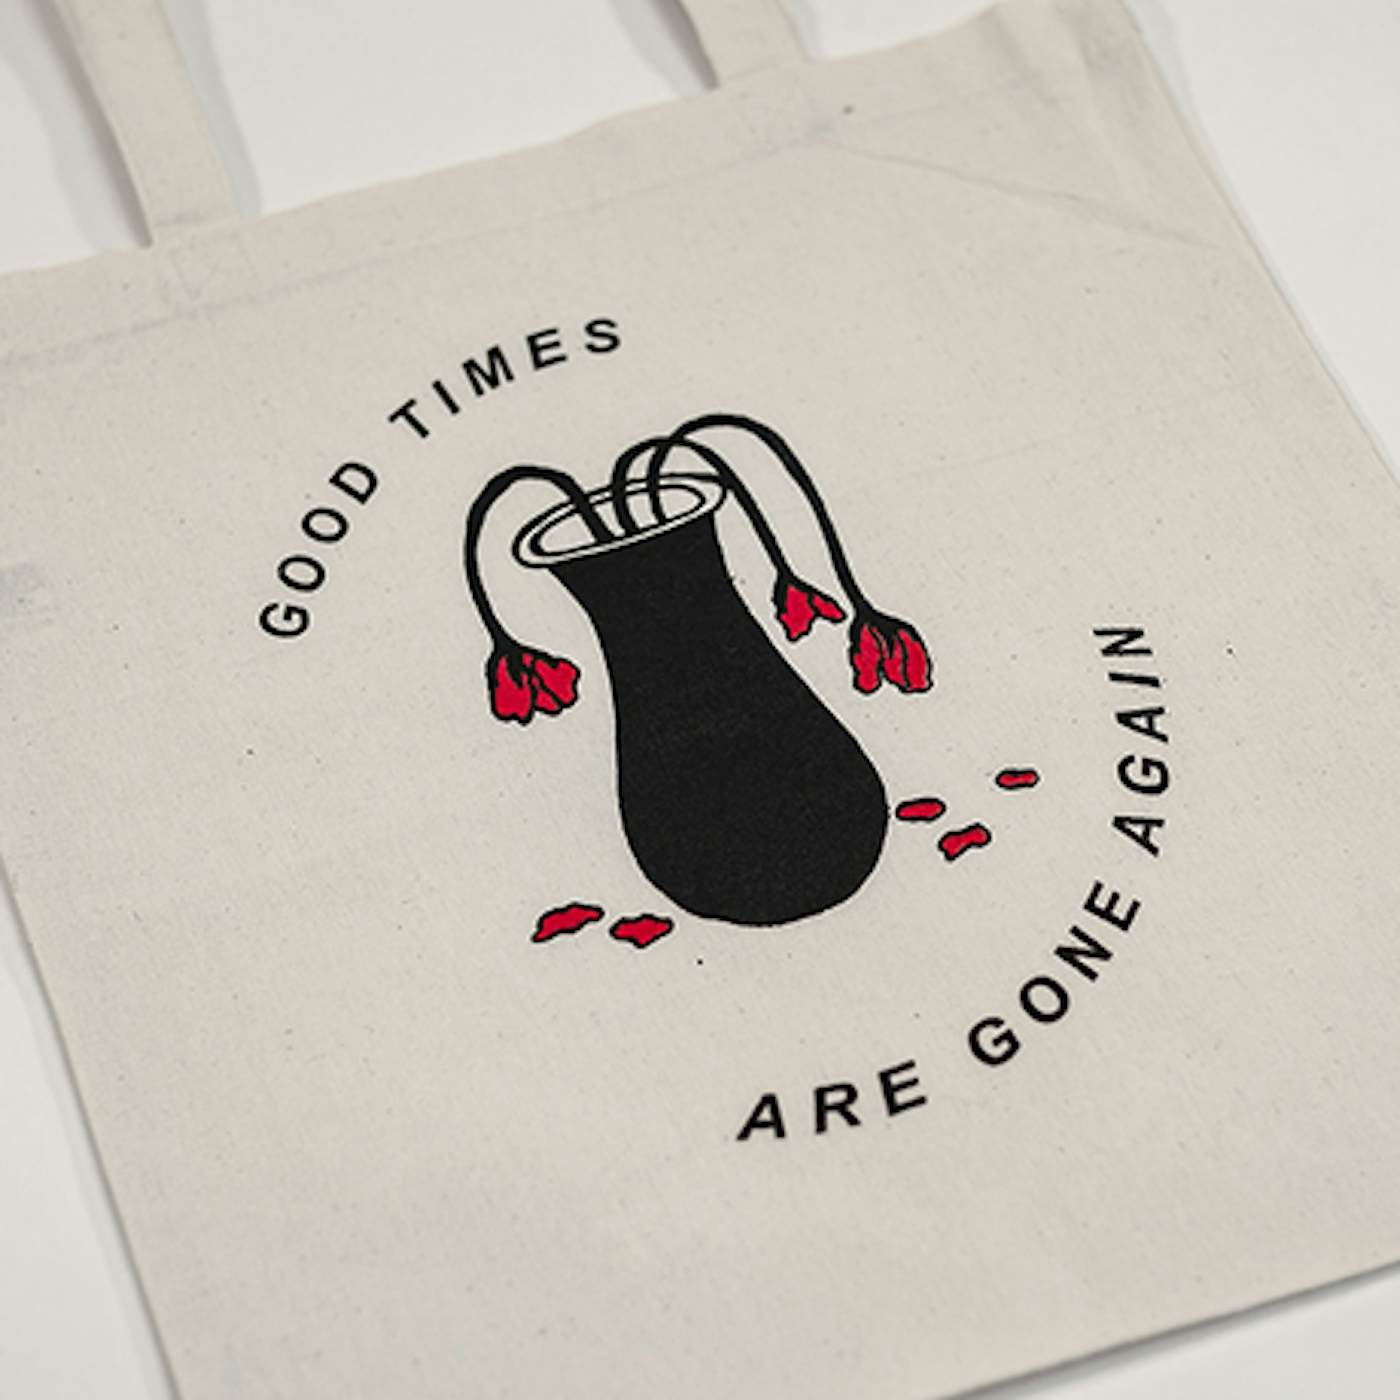 Fred Thomas Good Times Are Gone Again Tote